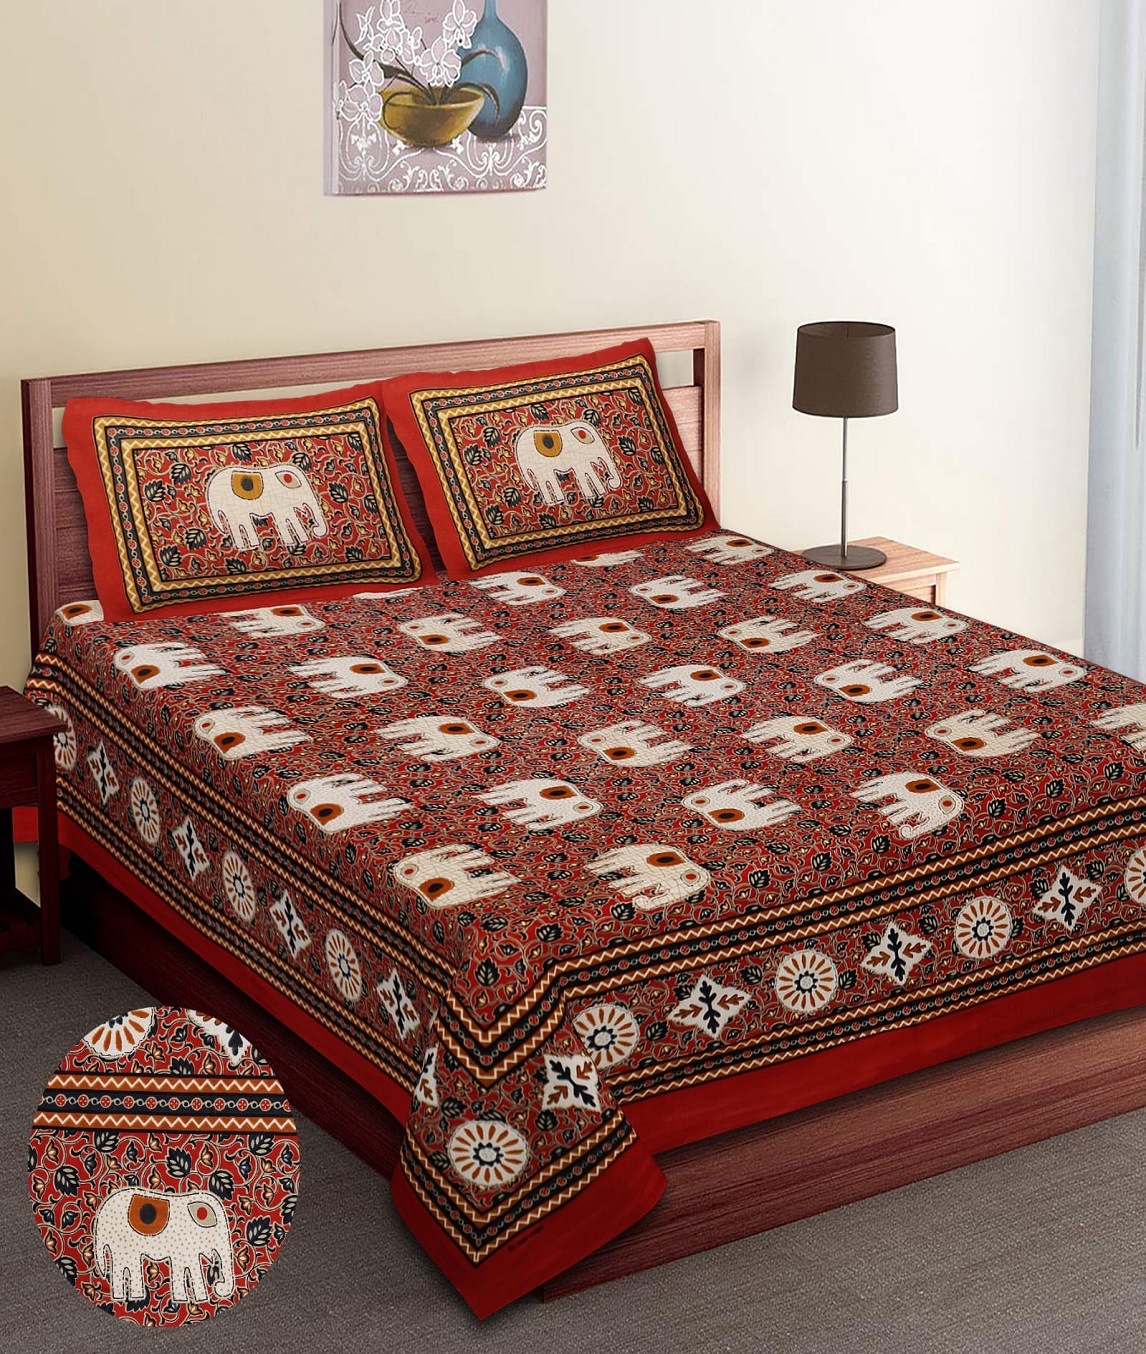 King size bedsheet with pillow covers